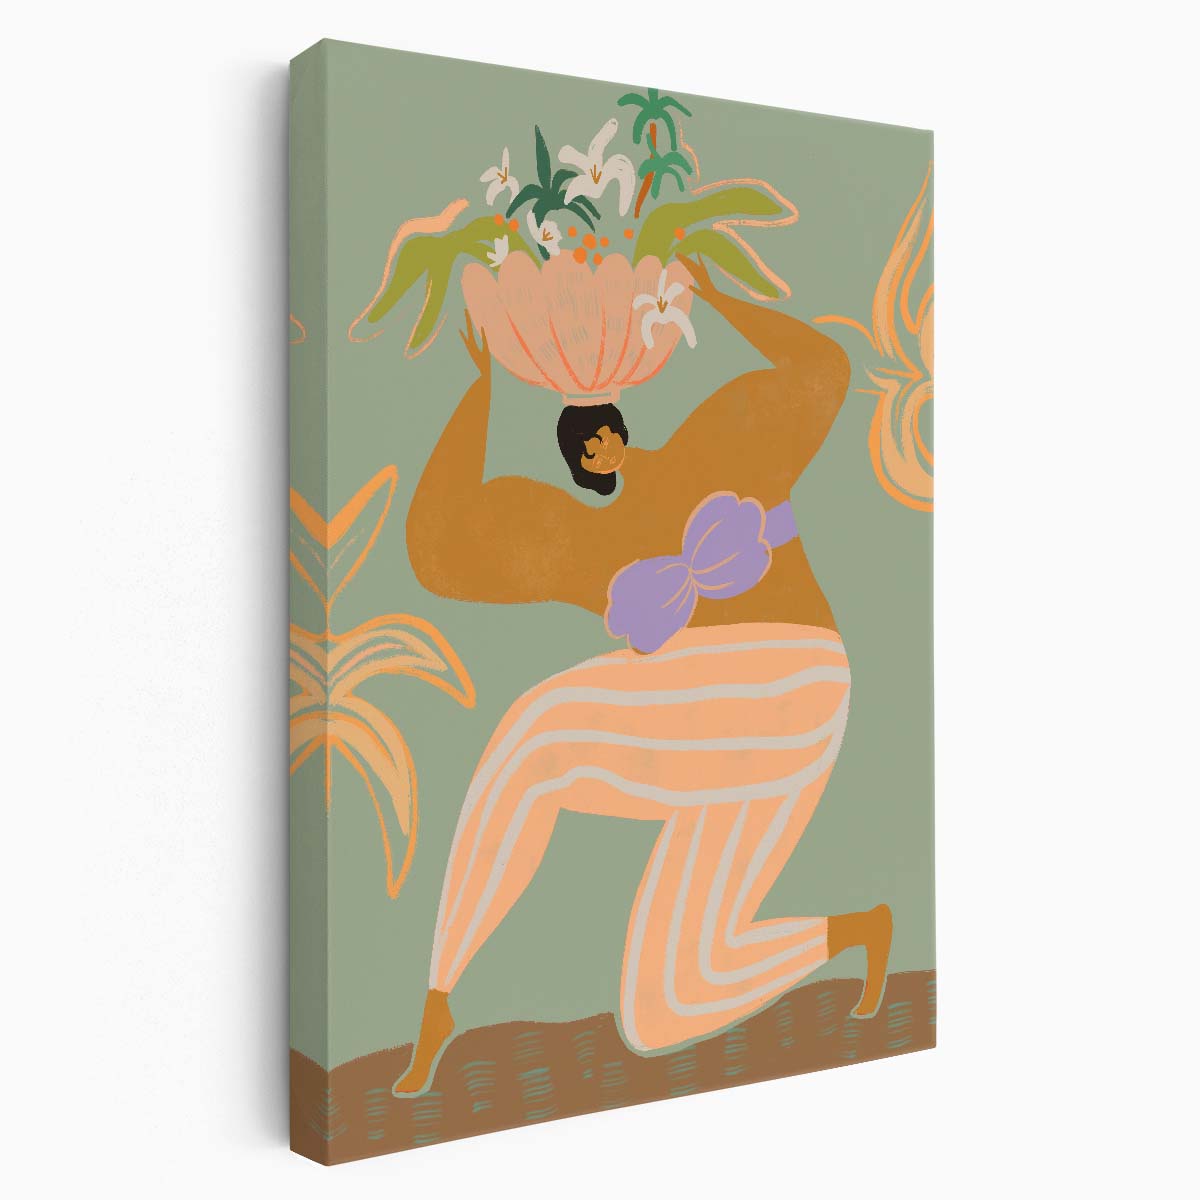 Colorful Figurative Illustration of Woman Carrying Floral Botanicals by Luxuriance Designs, made in USA